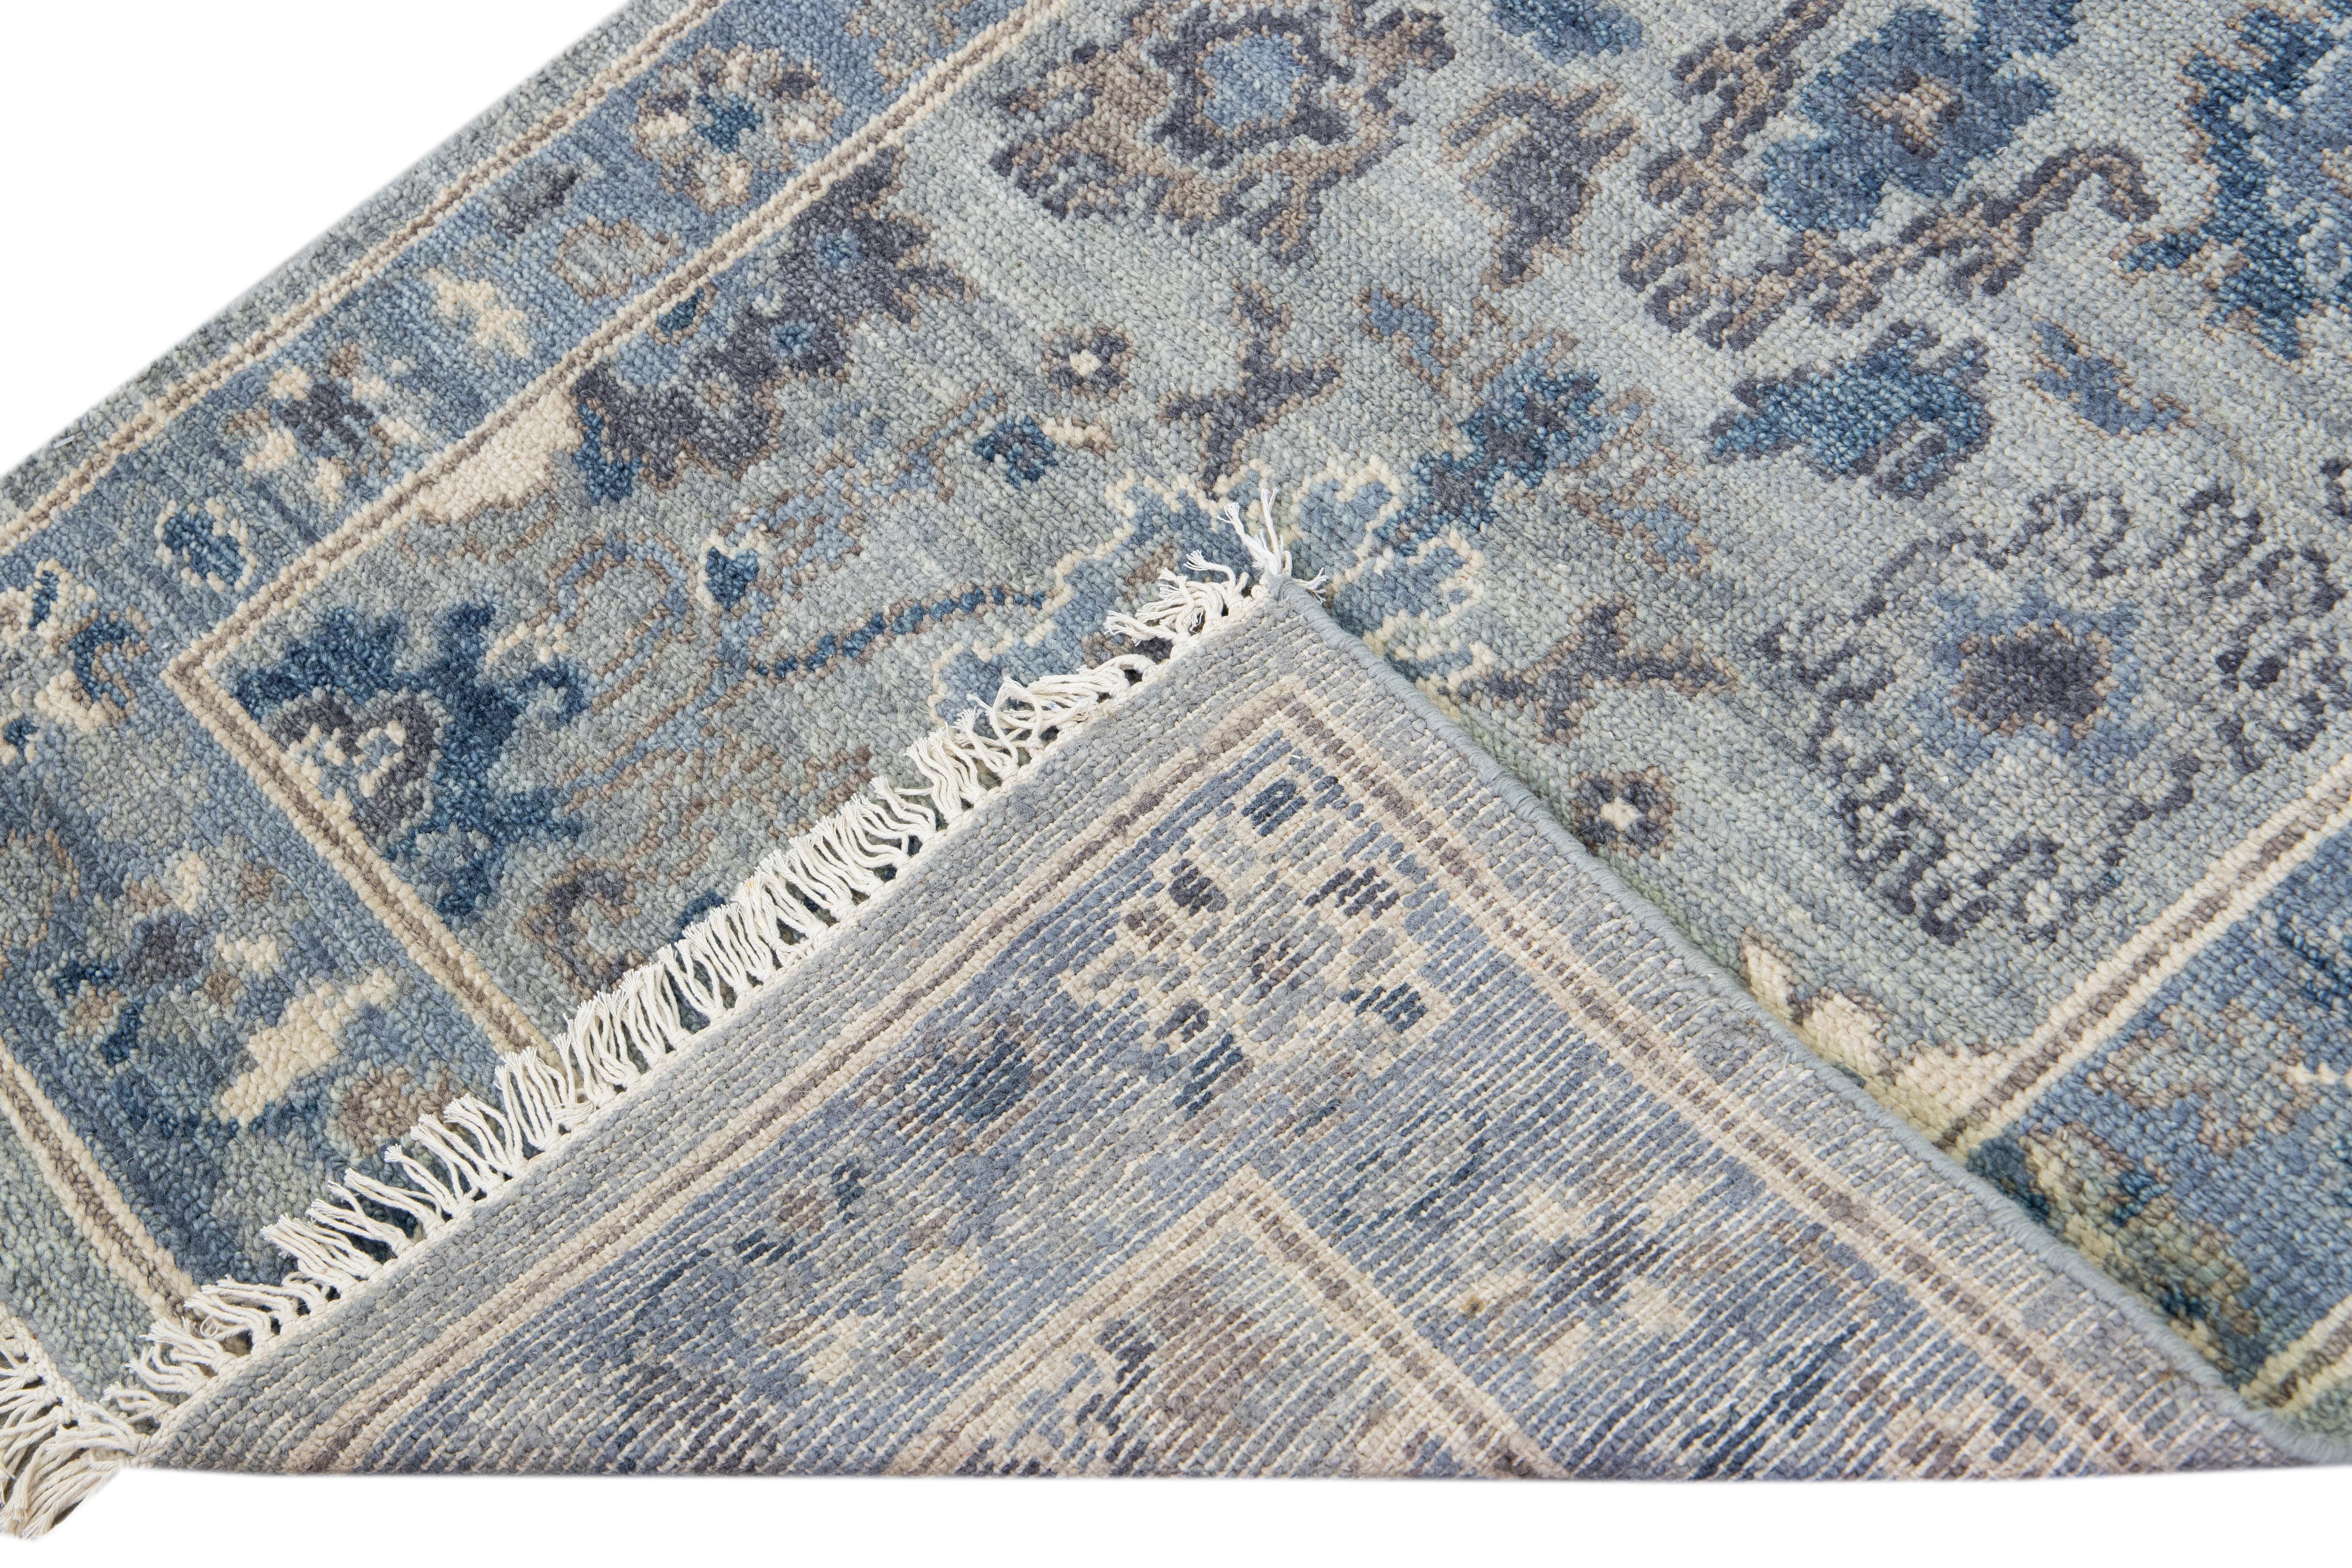 Beautiful modern Oushak hand-knotted wool runner with a silver-gray field. This Oushak rug has a blue designed frame with blue and beige accents all over a gorgeous floral design.

This rug measures 3'1